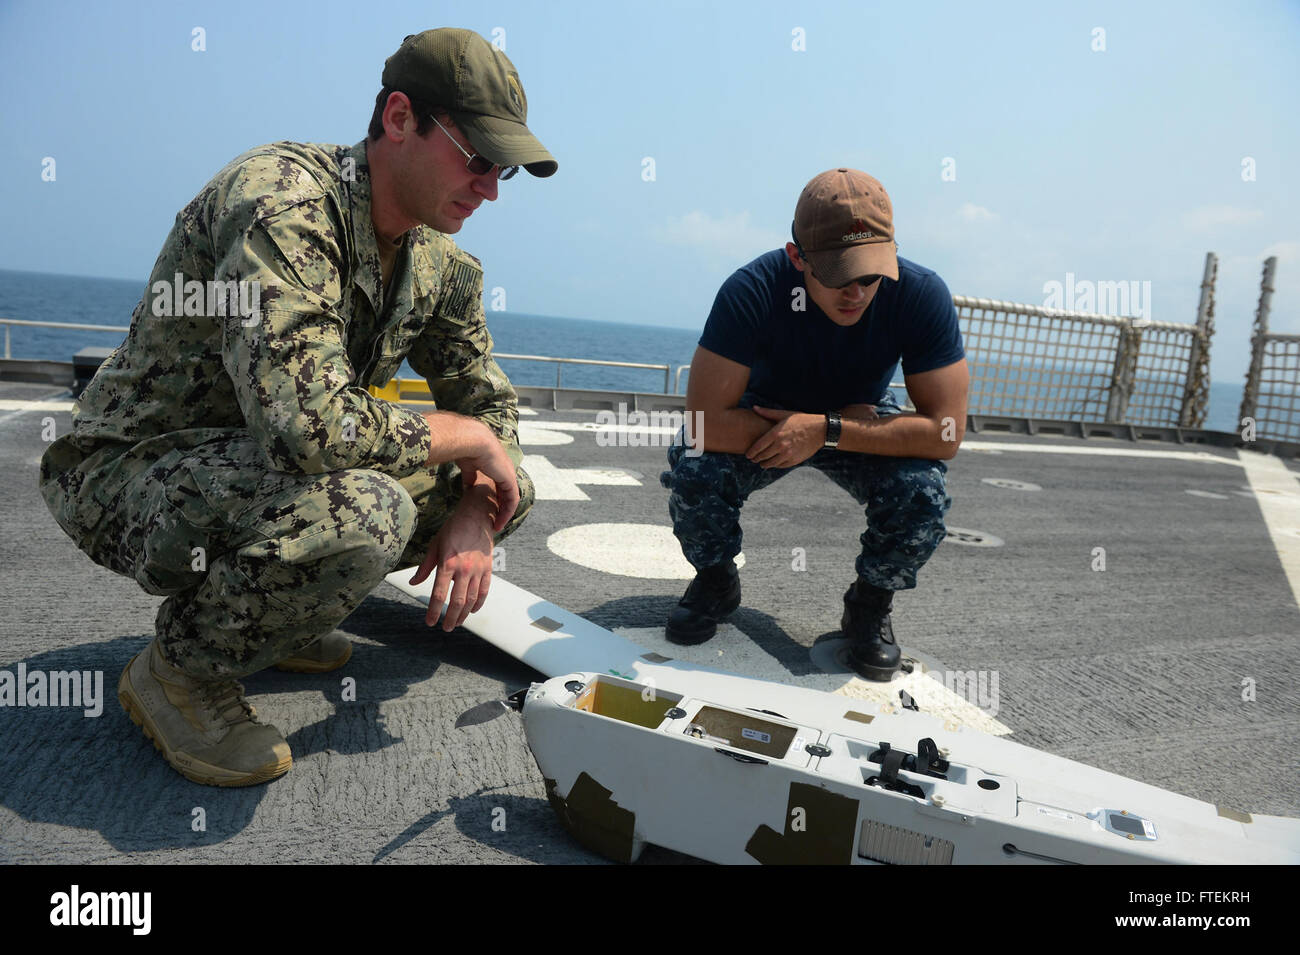 ATLANTIC OCEAN (Feb. 7, 2015) Information Technology Specialist 2nd Class Joshua Lesperance from Spring Valley, Ill. (left) and Intelligence Specialist 3rd Class Erik Grace of Houston, Texas (right) conduct routine maintenance on the Aqua Puma unmanned aerial system aboard the Military Sealift Command's joint high-speed vessel USNS Spearhead (JHSV 1), Feb. 7, 2015. Spearhead is on a scheduled deployment to the U.S. 6th Fleet area of operations in support of the international collaborative capacity-building program Africa Partnership Station. (U.S. Navy photo by Mass Communic Stock Photo